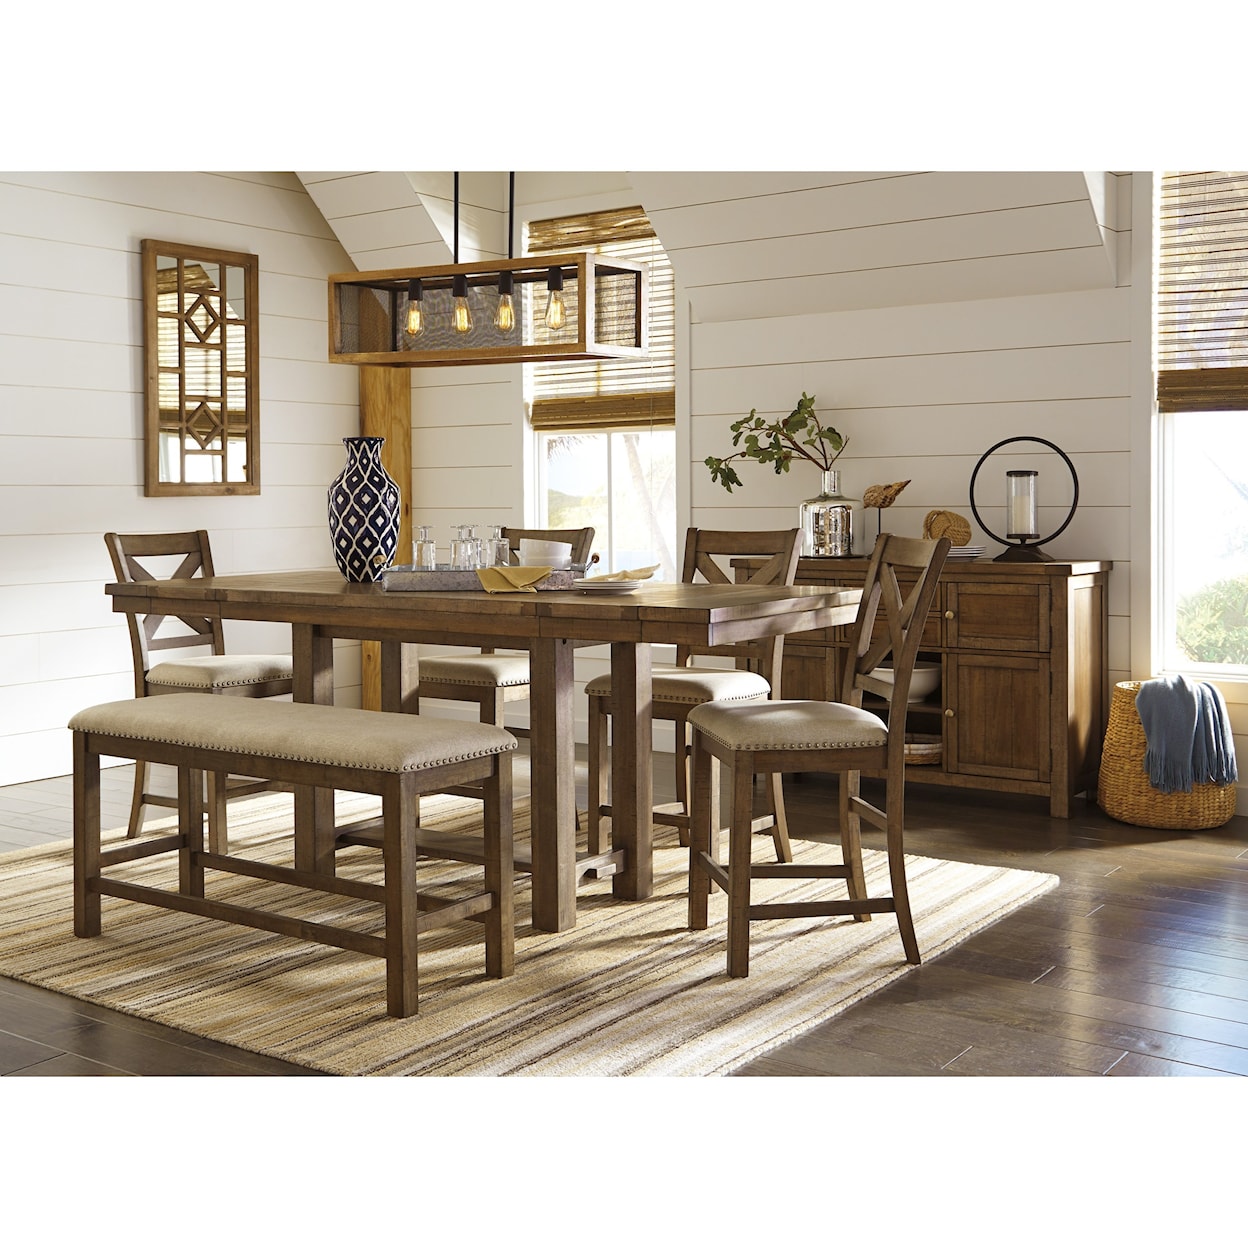 Benchcraft Moriville Dining Room Group